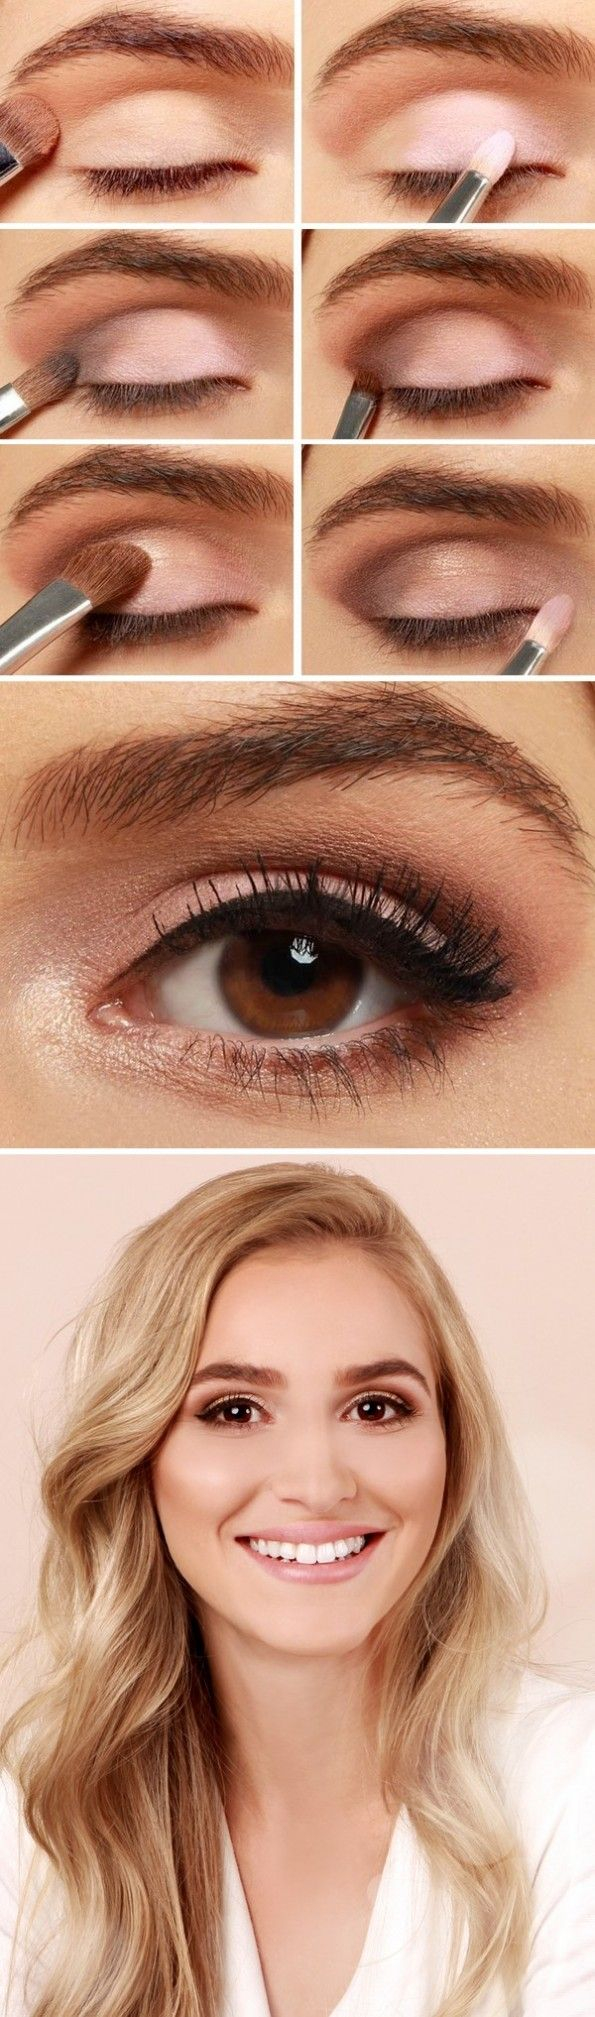 How To Do Natural Eye Makeup 27 Pretty Makeup Tutorials For Brown Eyes Styles Weekly